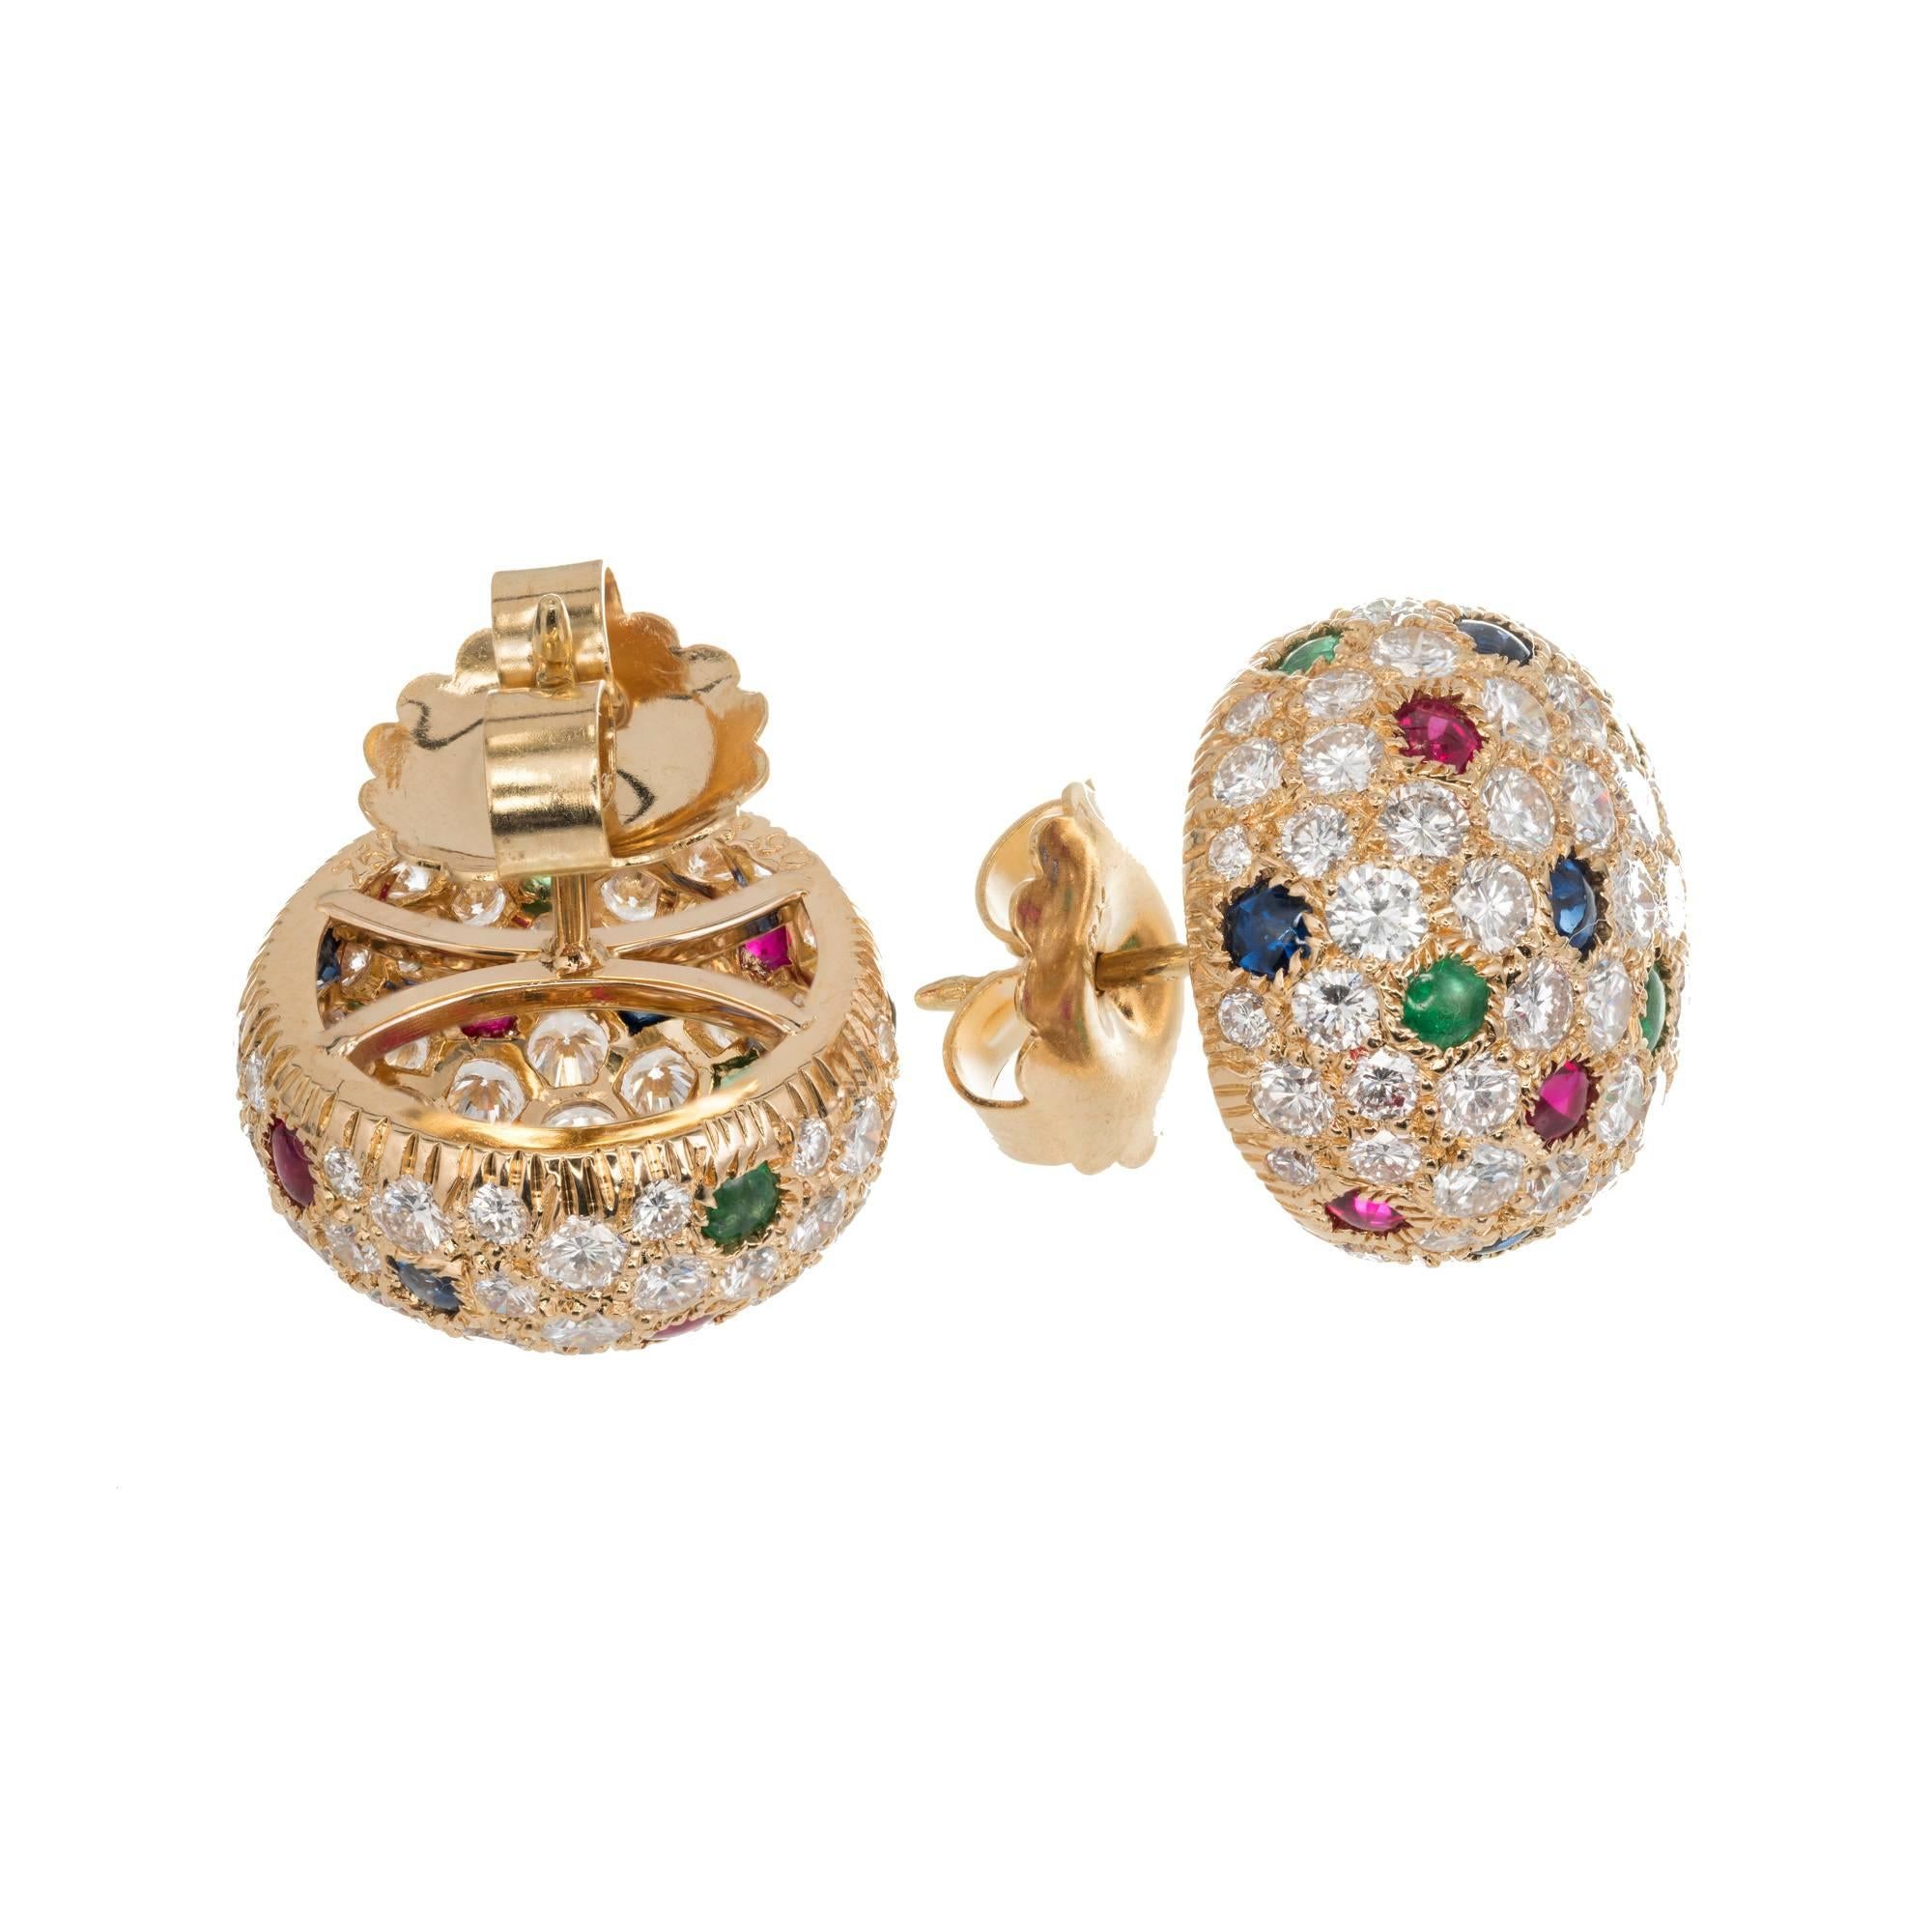 Cartier Panthere Dome Earrings. 18k Yellow Gold with pave set fine diamonds, cabochon emeralds, rubies and sapphires. 

130 Ideal full cut round diamonds, E to F VVS- VS approximately 6.00 carats
14 fine gem bright blue cabochon cut sapphires, VS